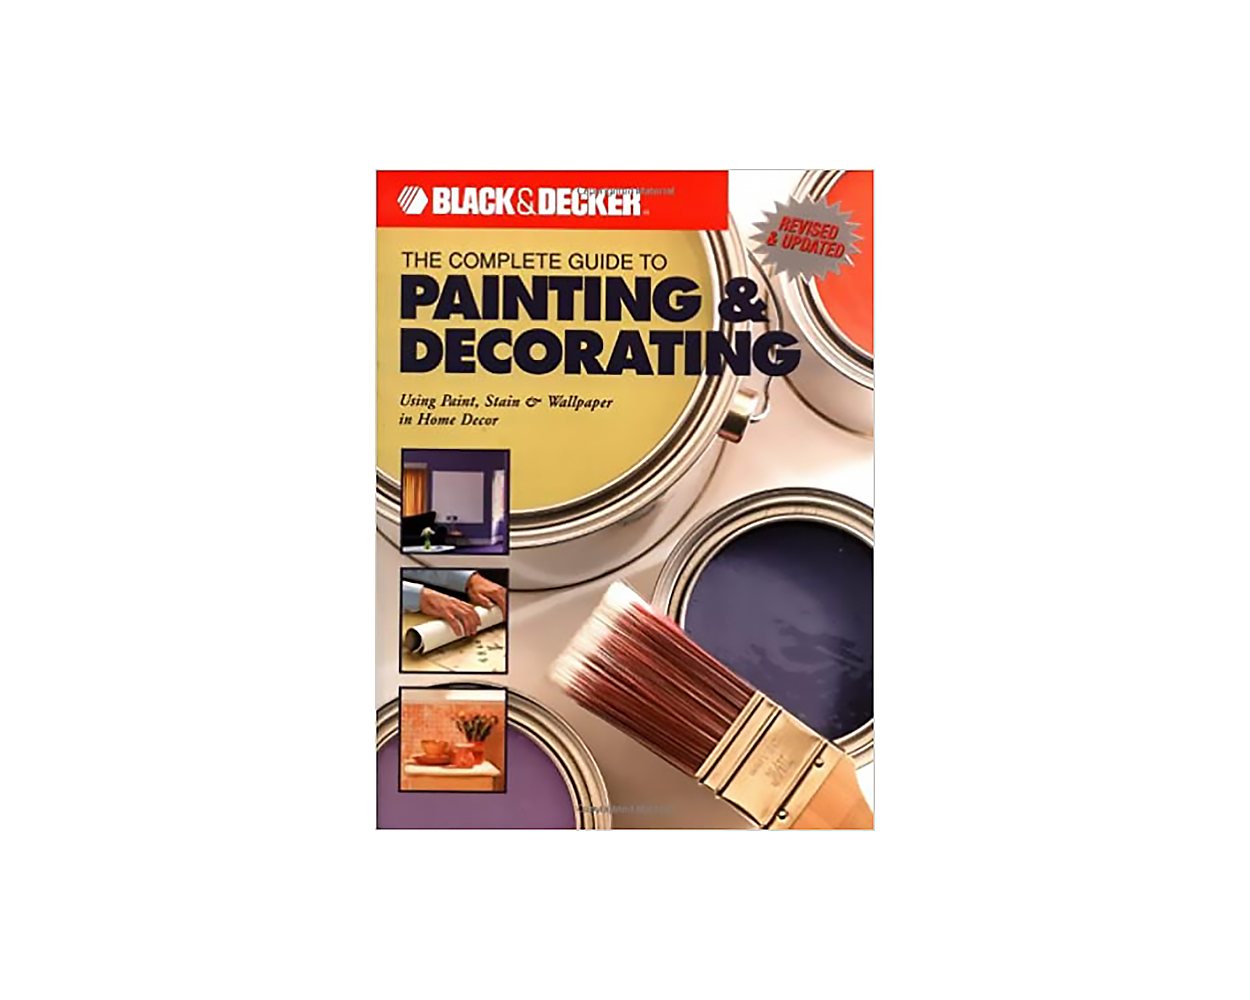 The Complete Guide to Painting & Decorating (REVISED): Builder's Book,  Inc.Bookstore